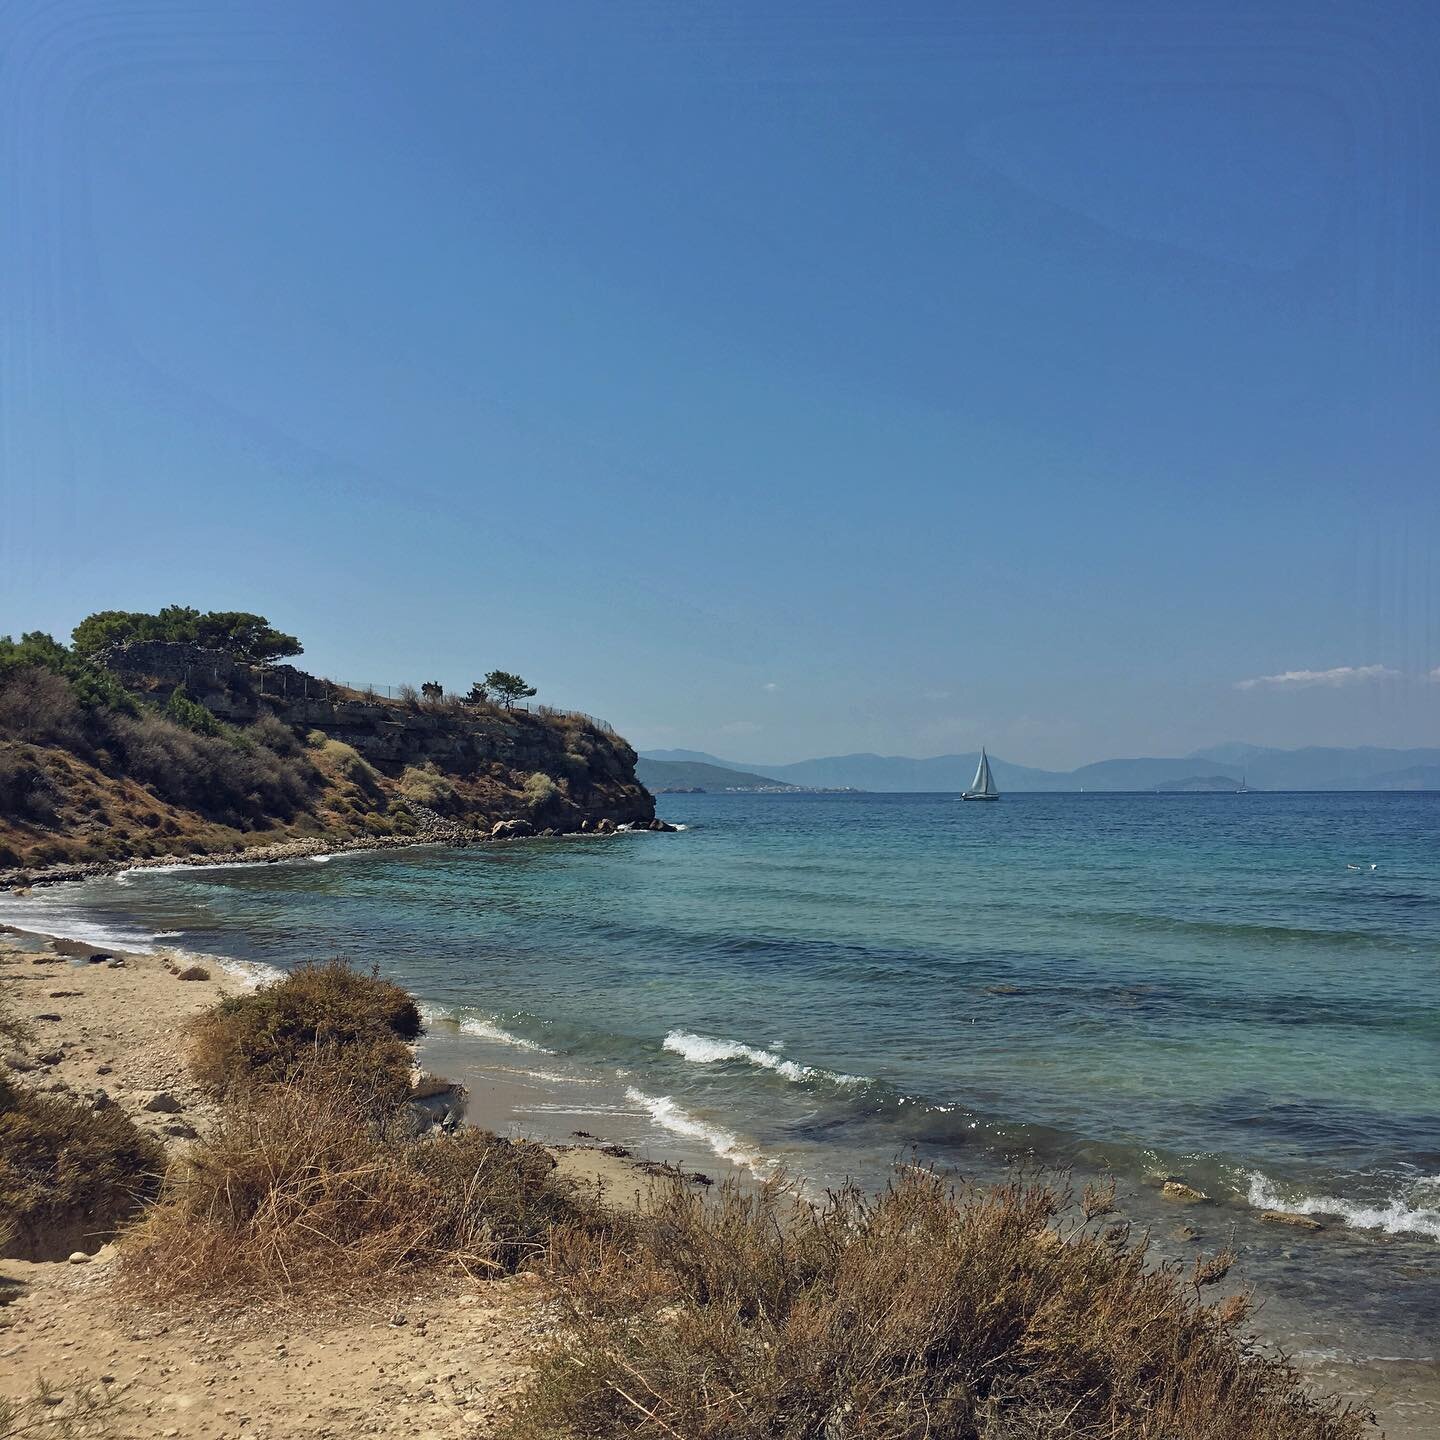 Greek summer coming to an end. It was the best I had yet and I&rsquo;m looking forward to many more.
&bull;
&bull;
&bull;
&bull;
#aegina #greece #greekislands #athens #photooftheday #instasummer #beach #expatlife #livetotravel #livingabroad #traveler